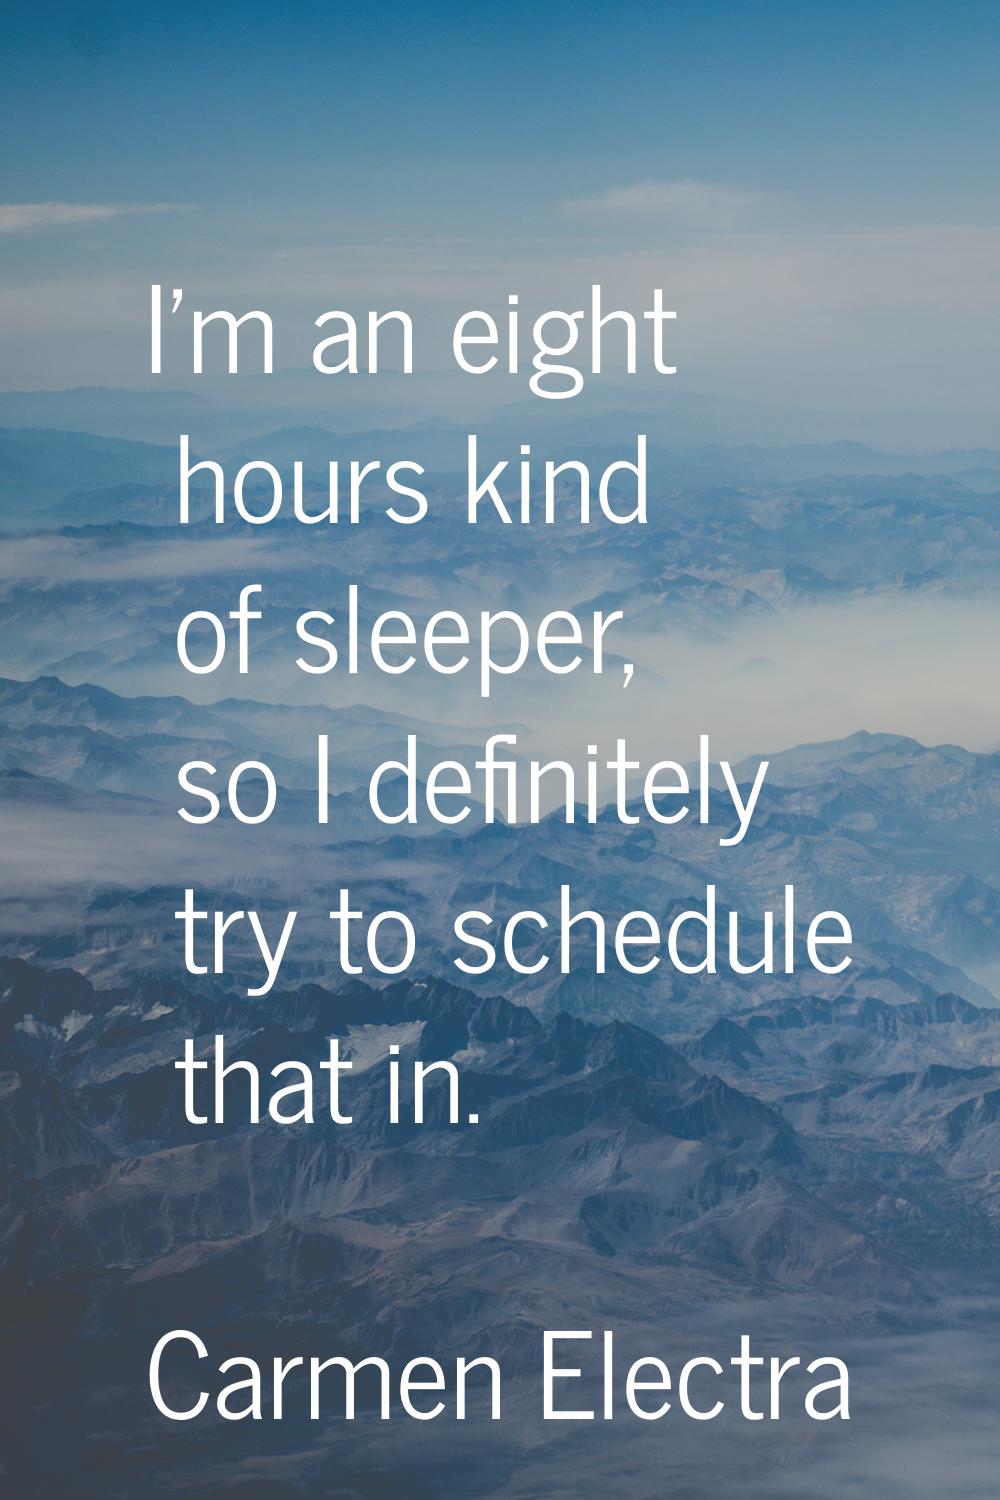 I'm an eight hours kind of sleeper, so I definitely try to schedule that in.